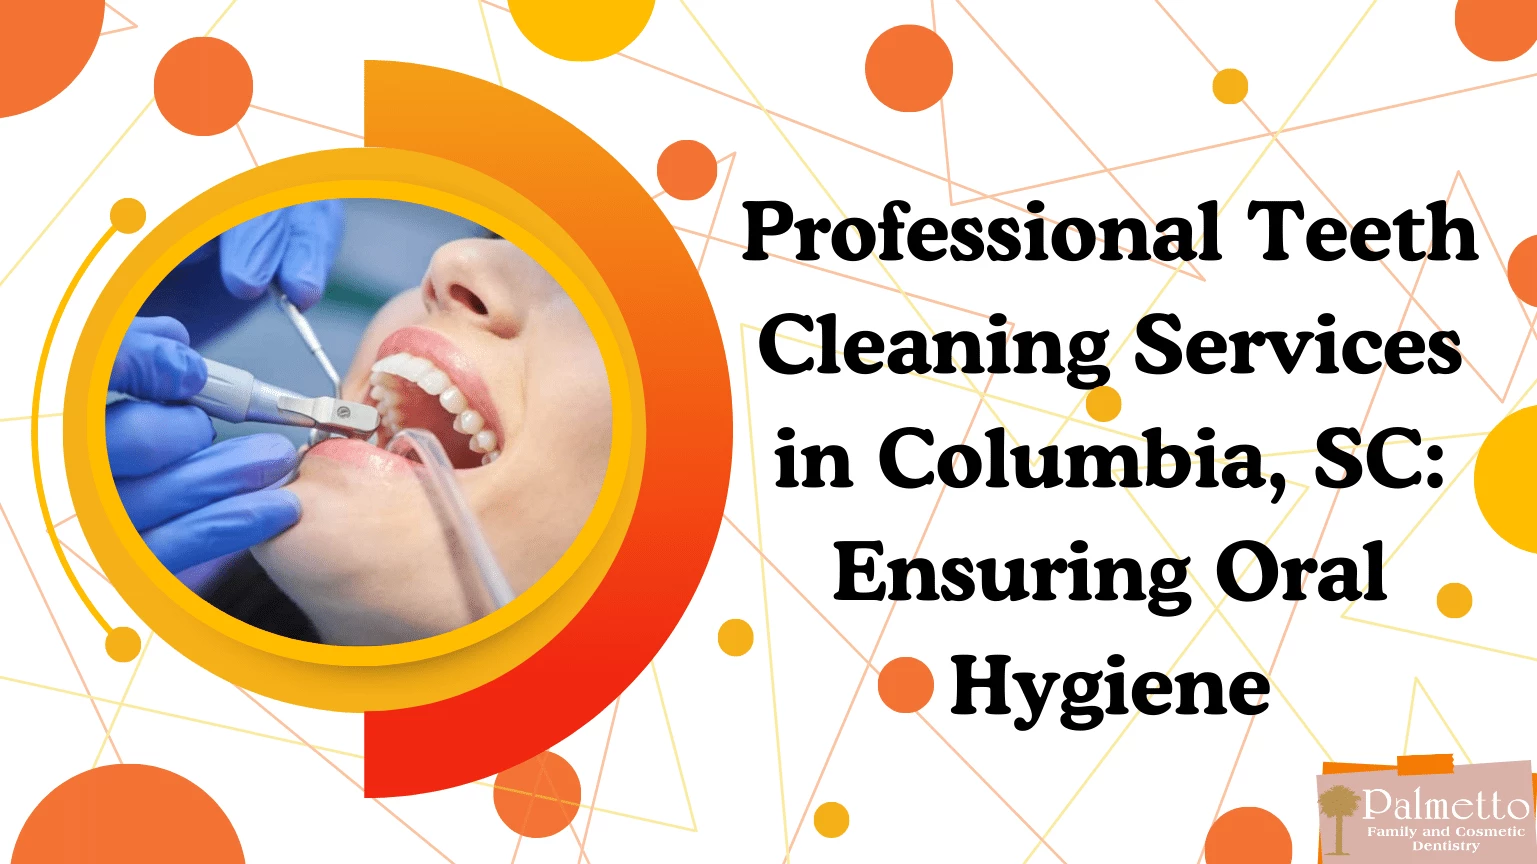 Professional Teeth Cleaning Services in Columbia, SC Ensuring Oral Hygiene